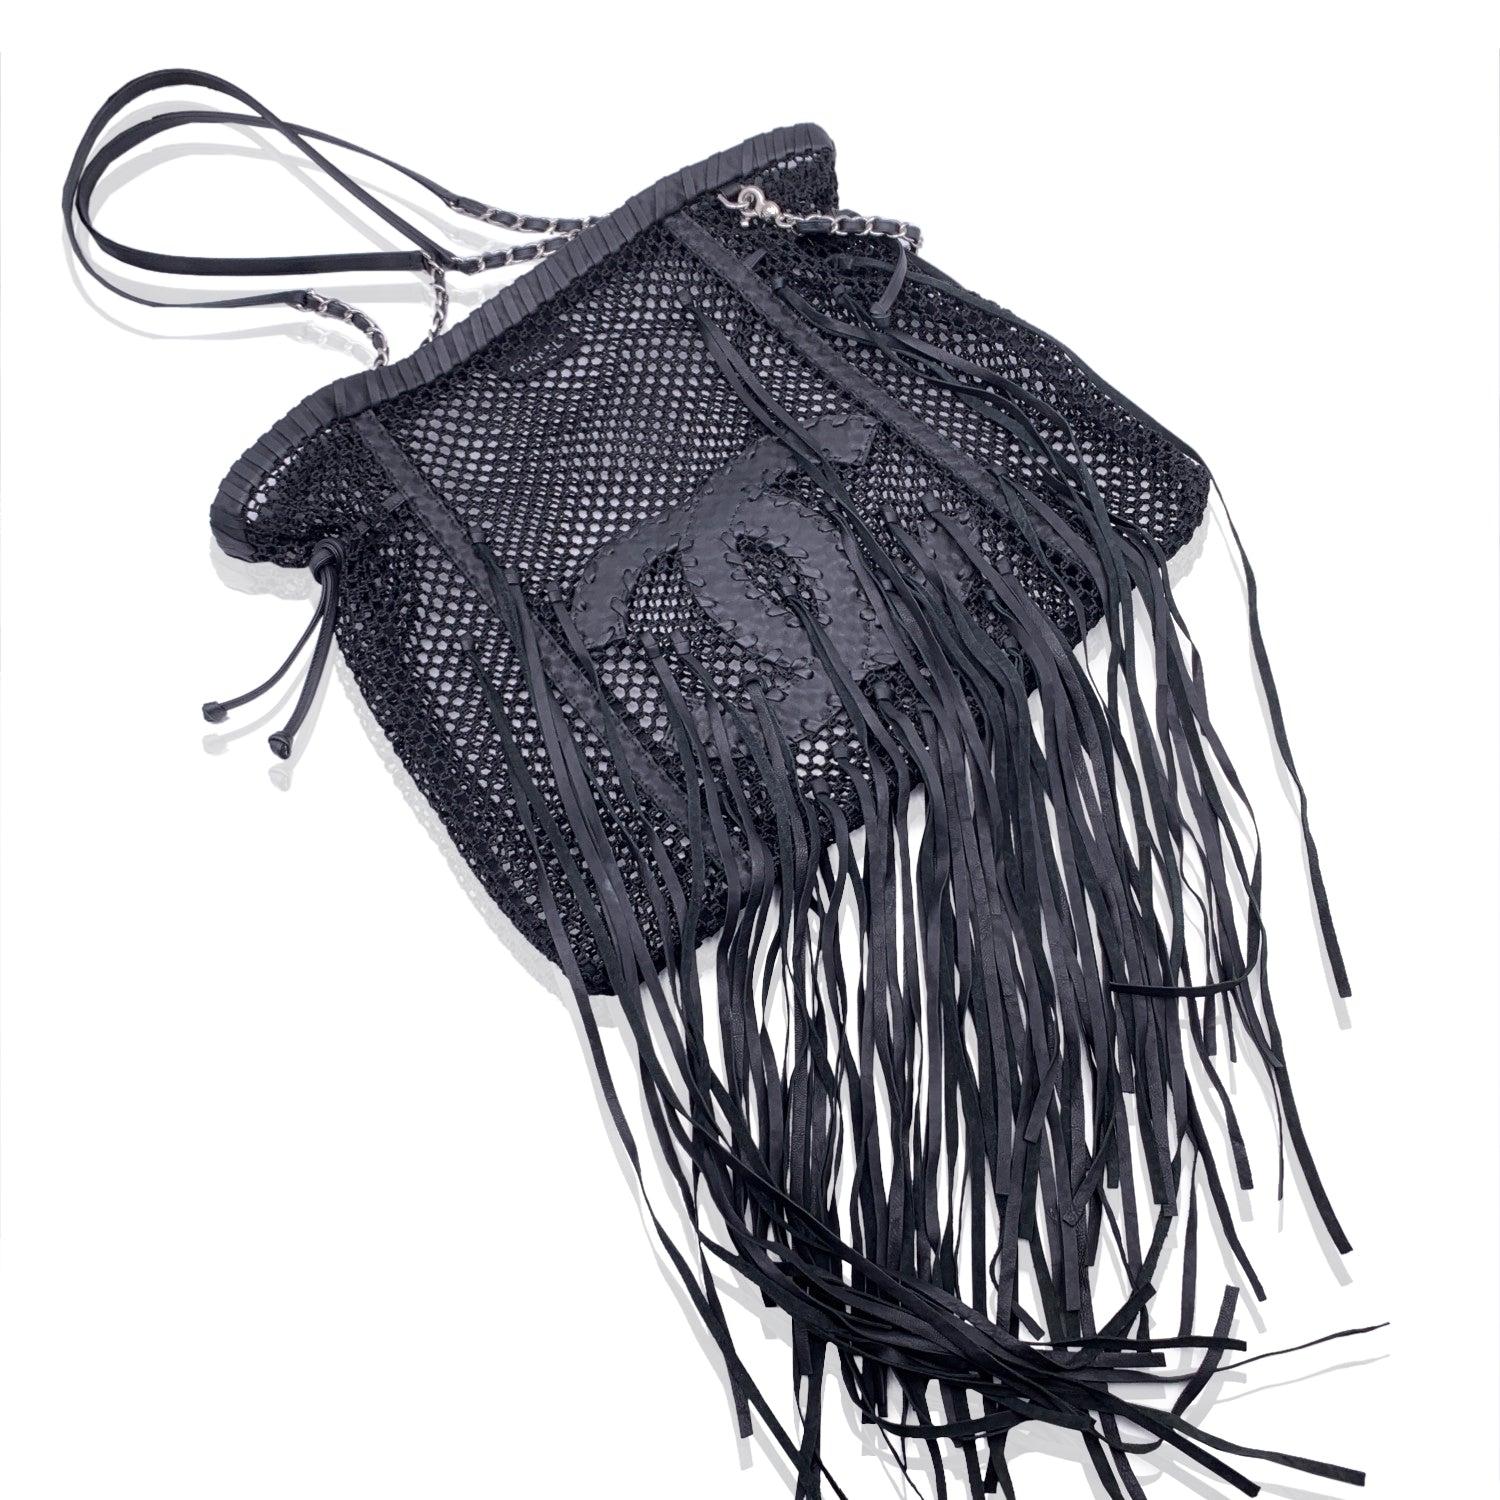 Stunning Chanel Mesh Tote Bag in in black crochet nylon fabric and leather, from the 2011 resort collection. It features a big CC logo in leather with long fringes detailing. Souble leather and silver metal chain shoulder straps. Unlined. 'Chanel -